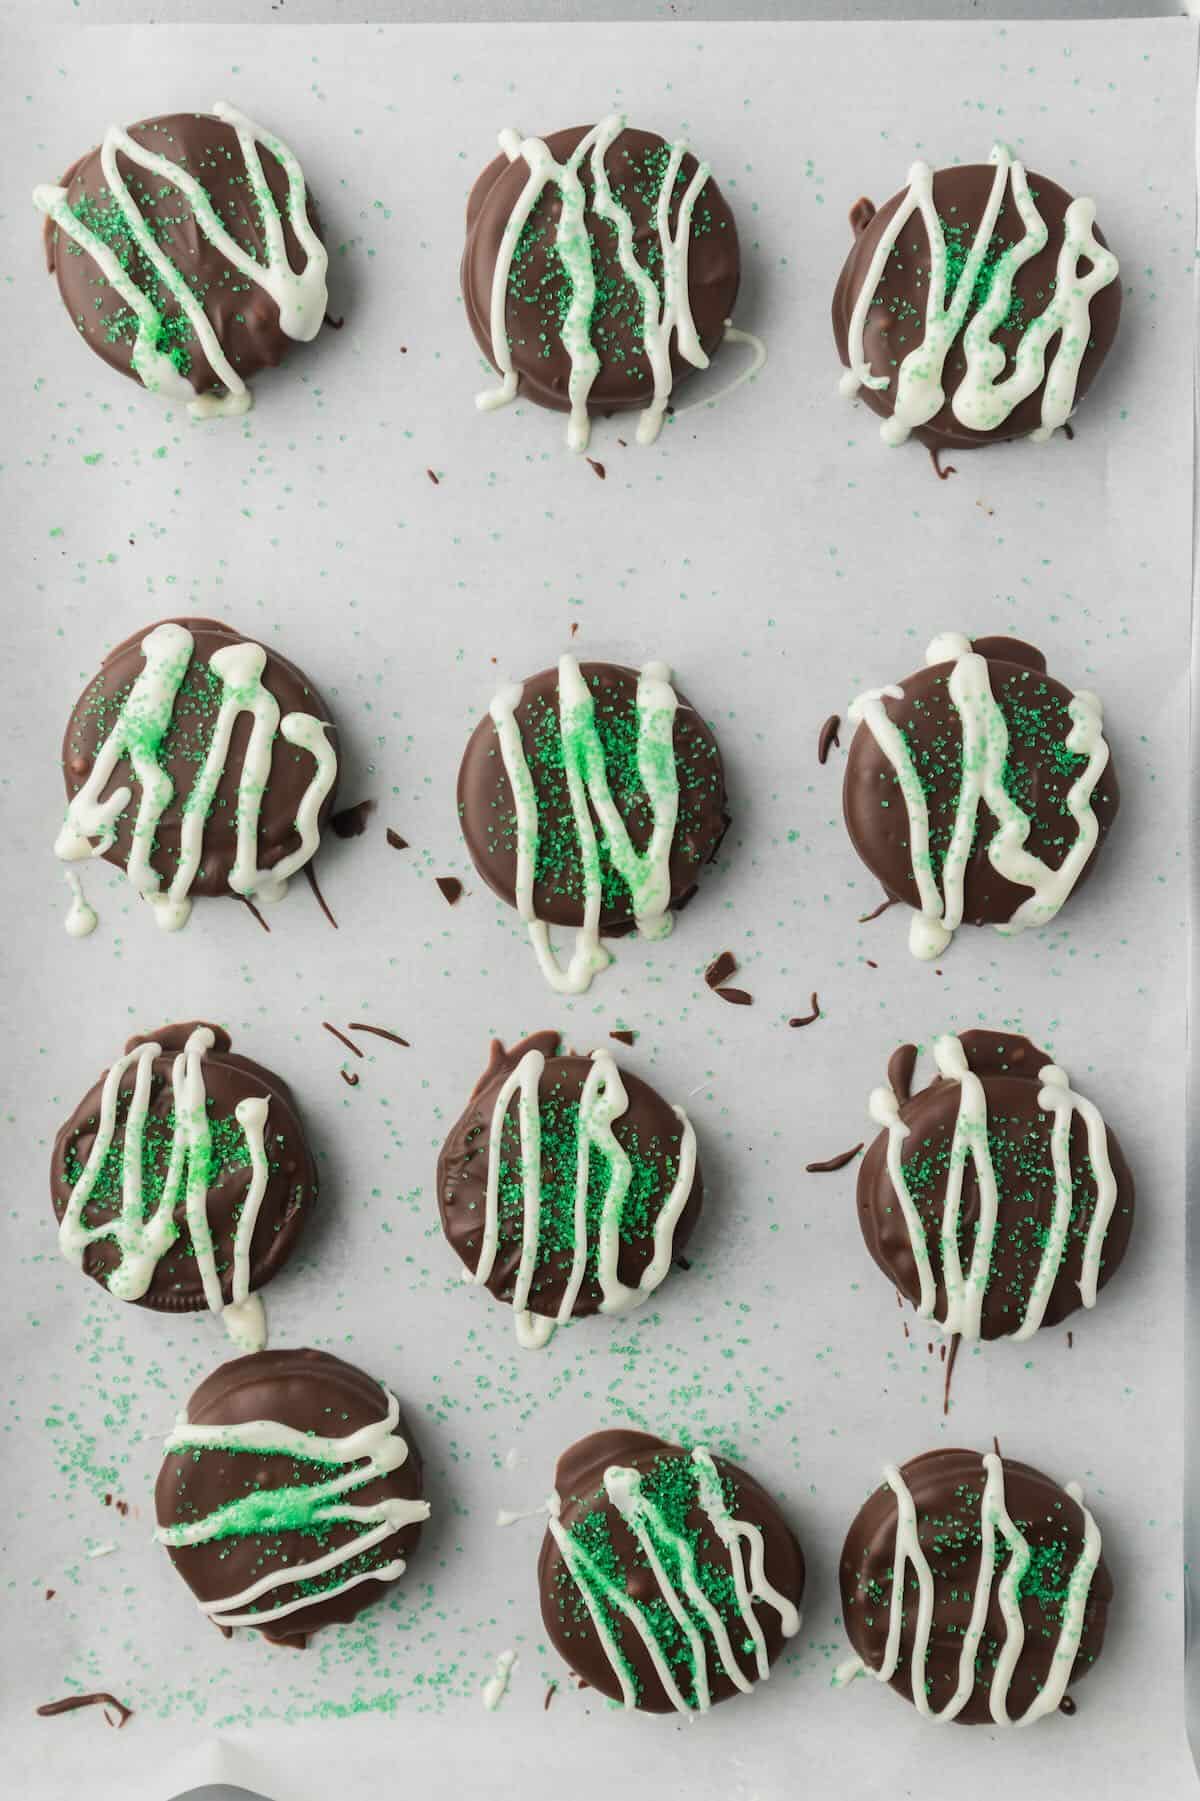 A dozen chocolate-dipped Oreos topped with a drizzle of white chocolate and green sanding sugar. 